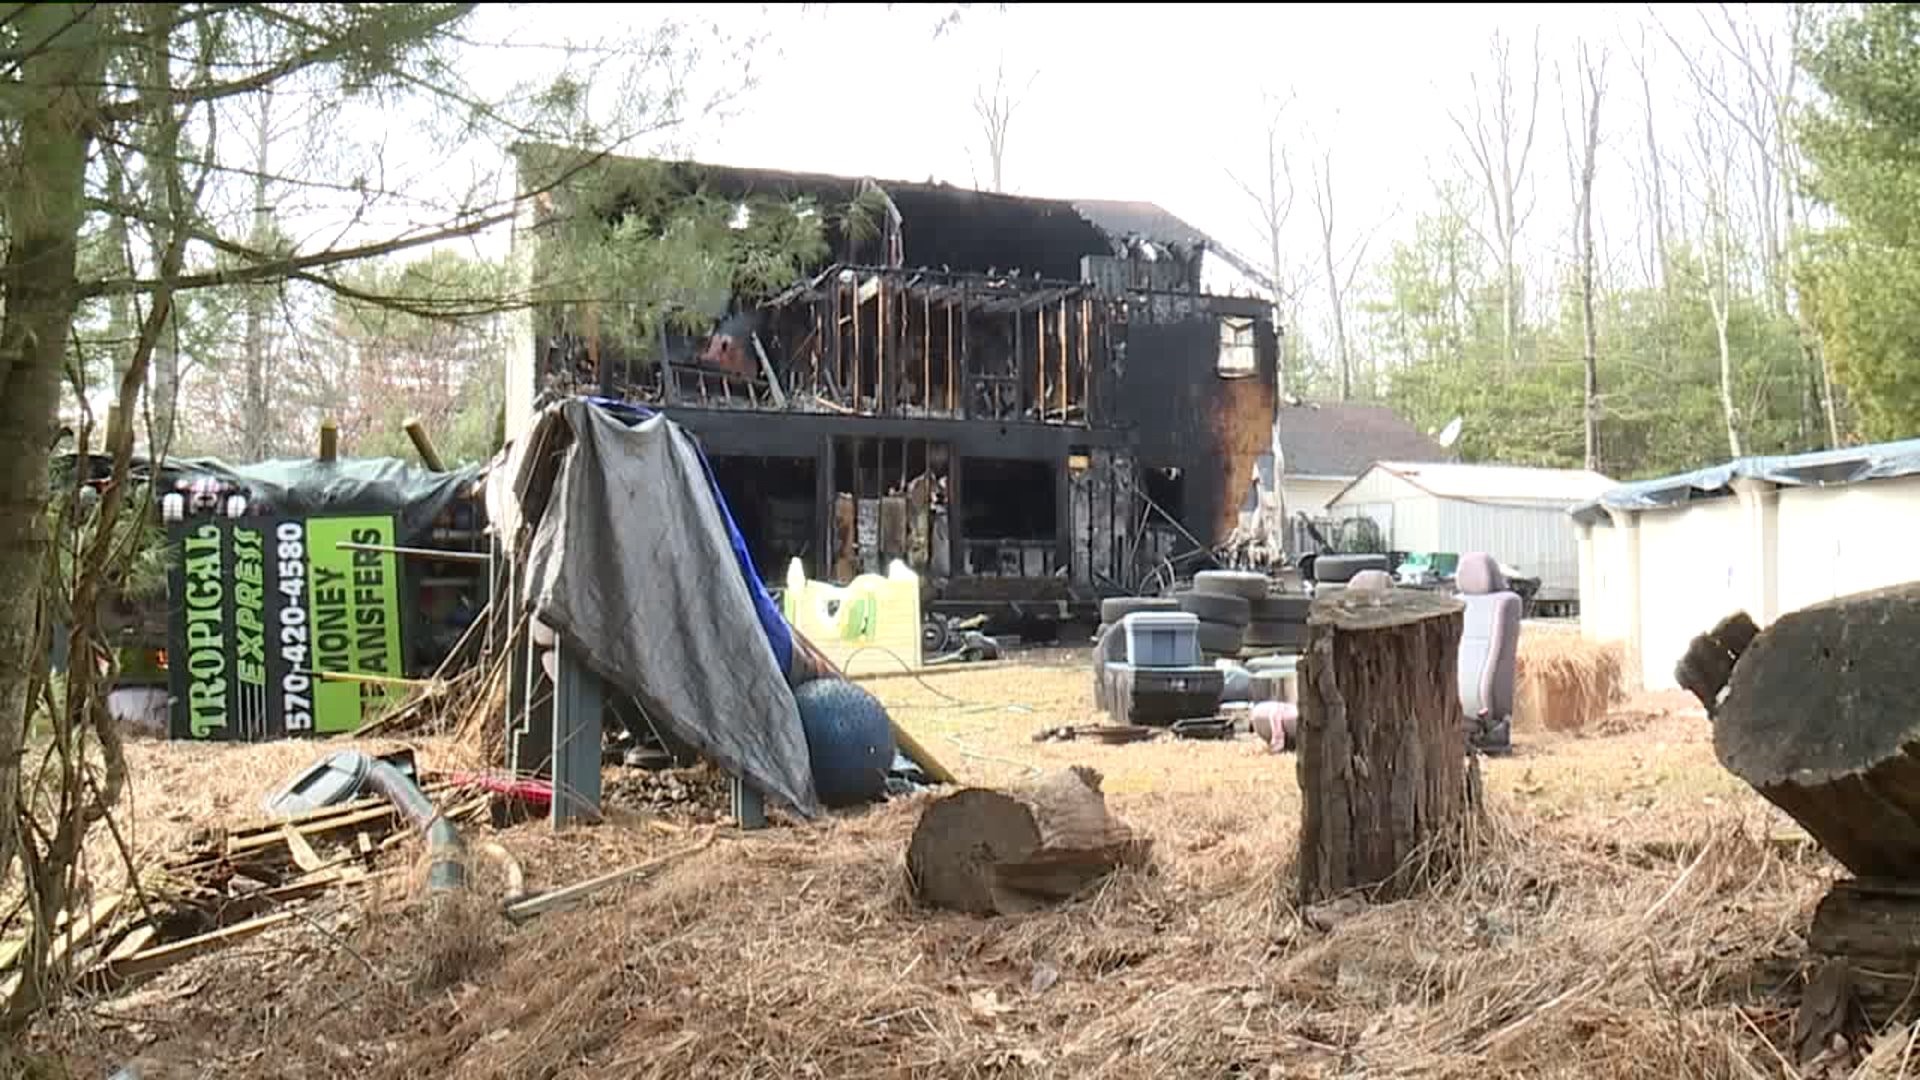 Home in Poconos Ripped by Fire